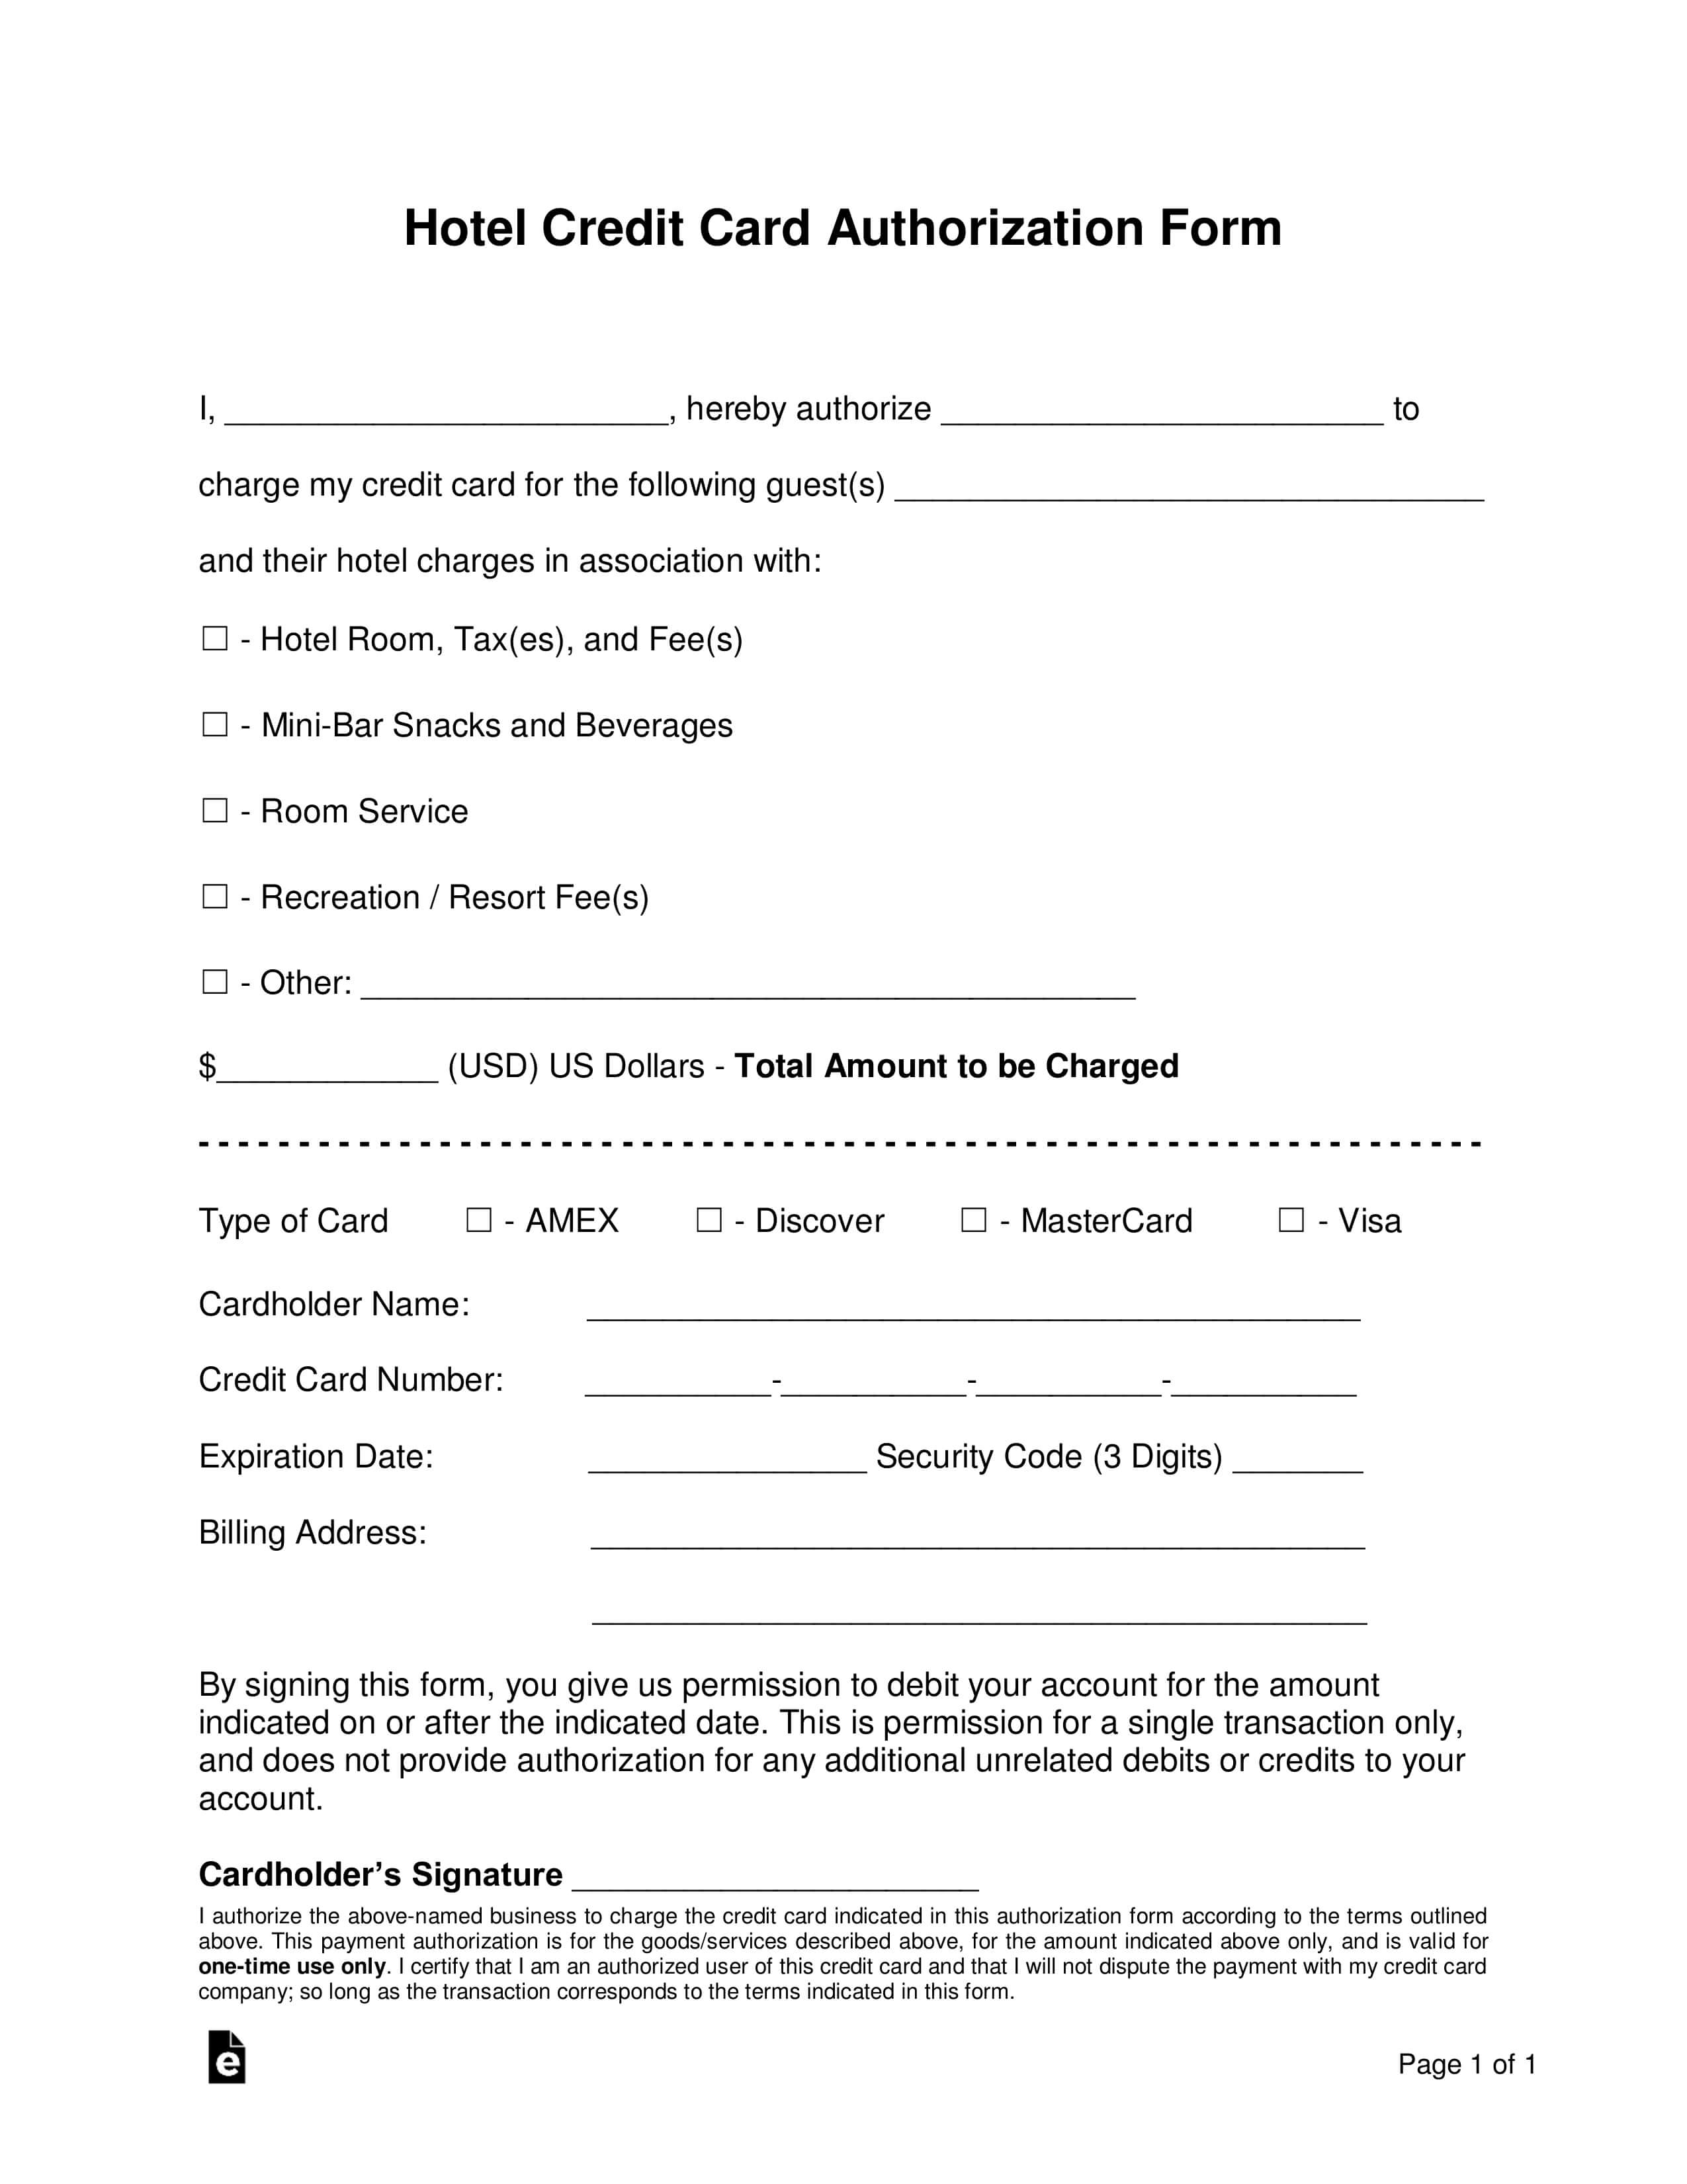 Free Hotel Credit Card Authorization Forms - Word | Pdf Throughout Hotel Credit Card Authorization Form Template